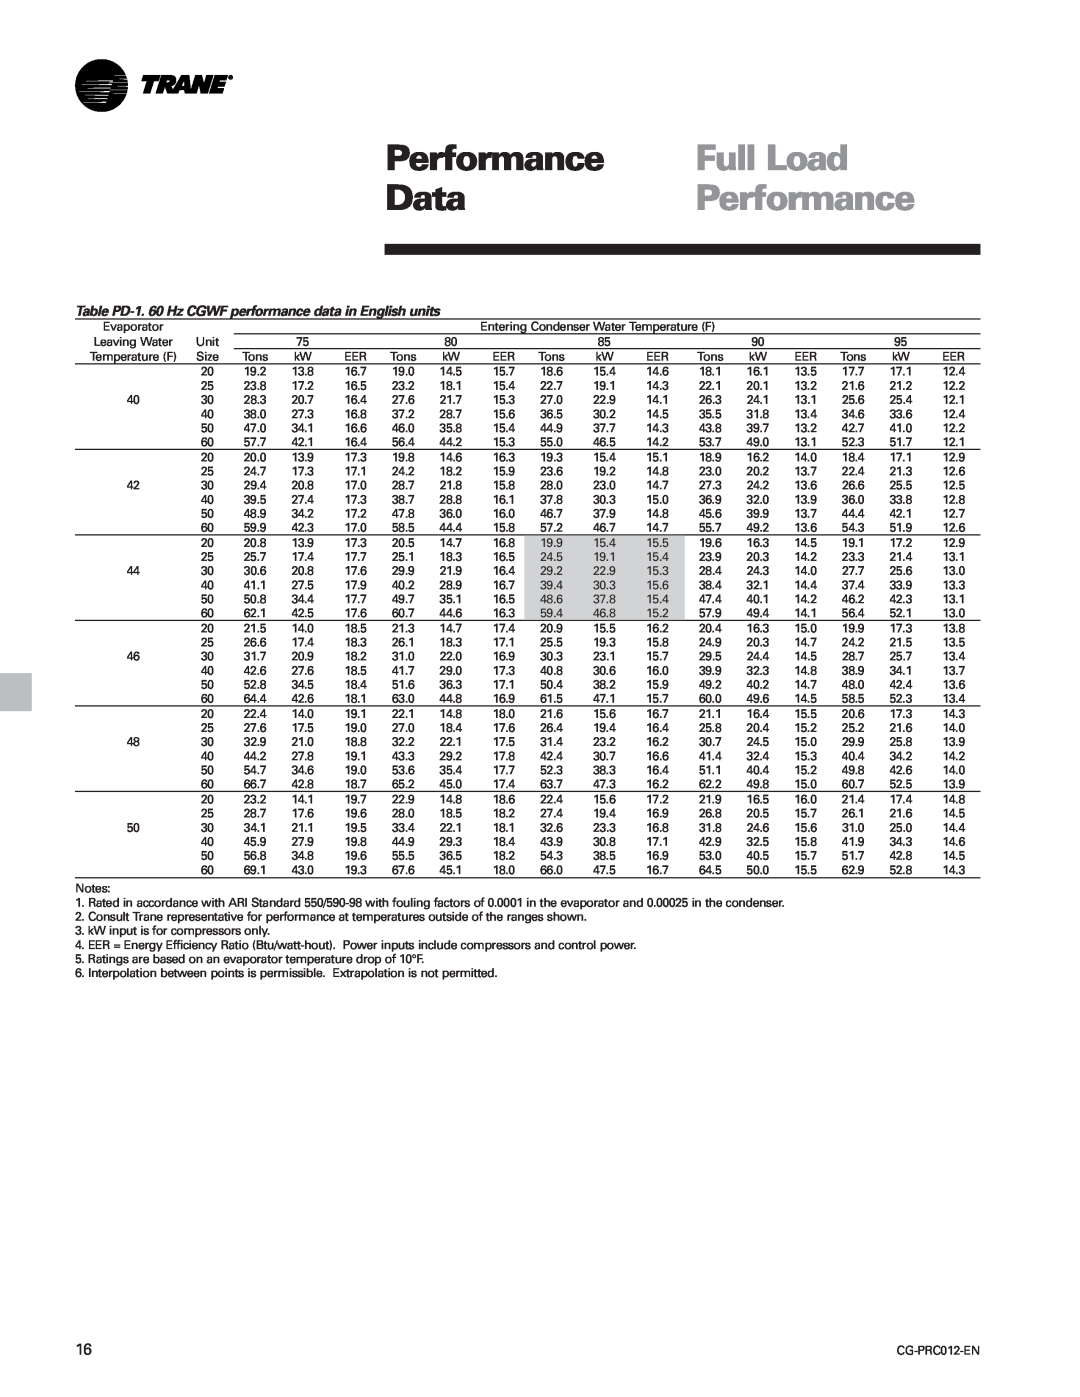 Trane CCAF manual Performance, Full Load, Data, Table PD-1. 60 Hz CGWF performance data in English units 